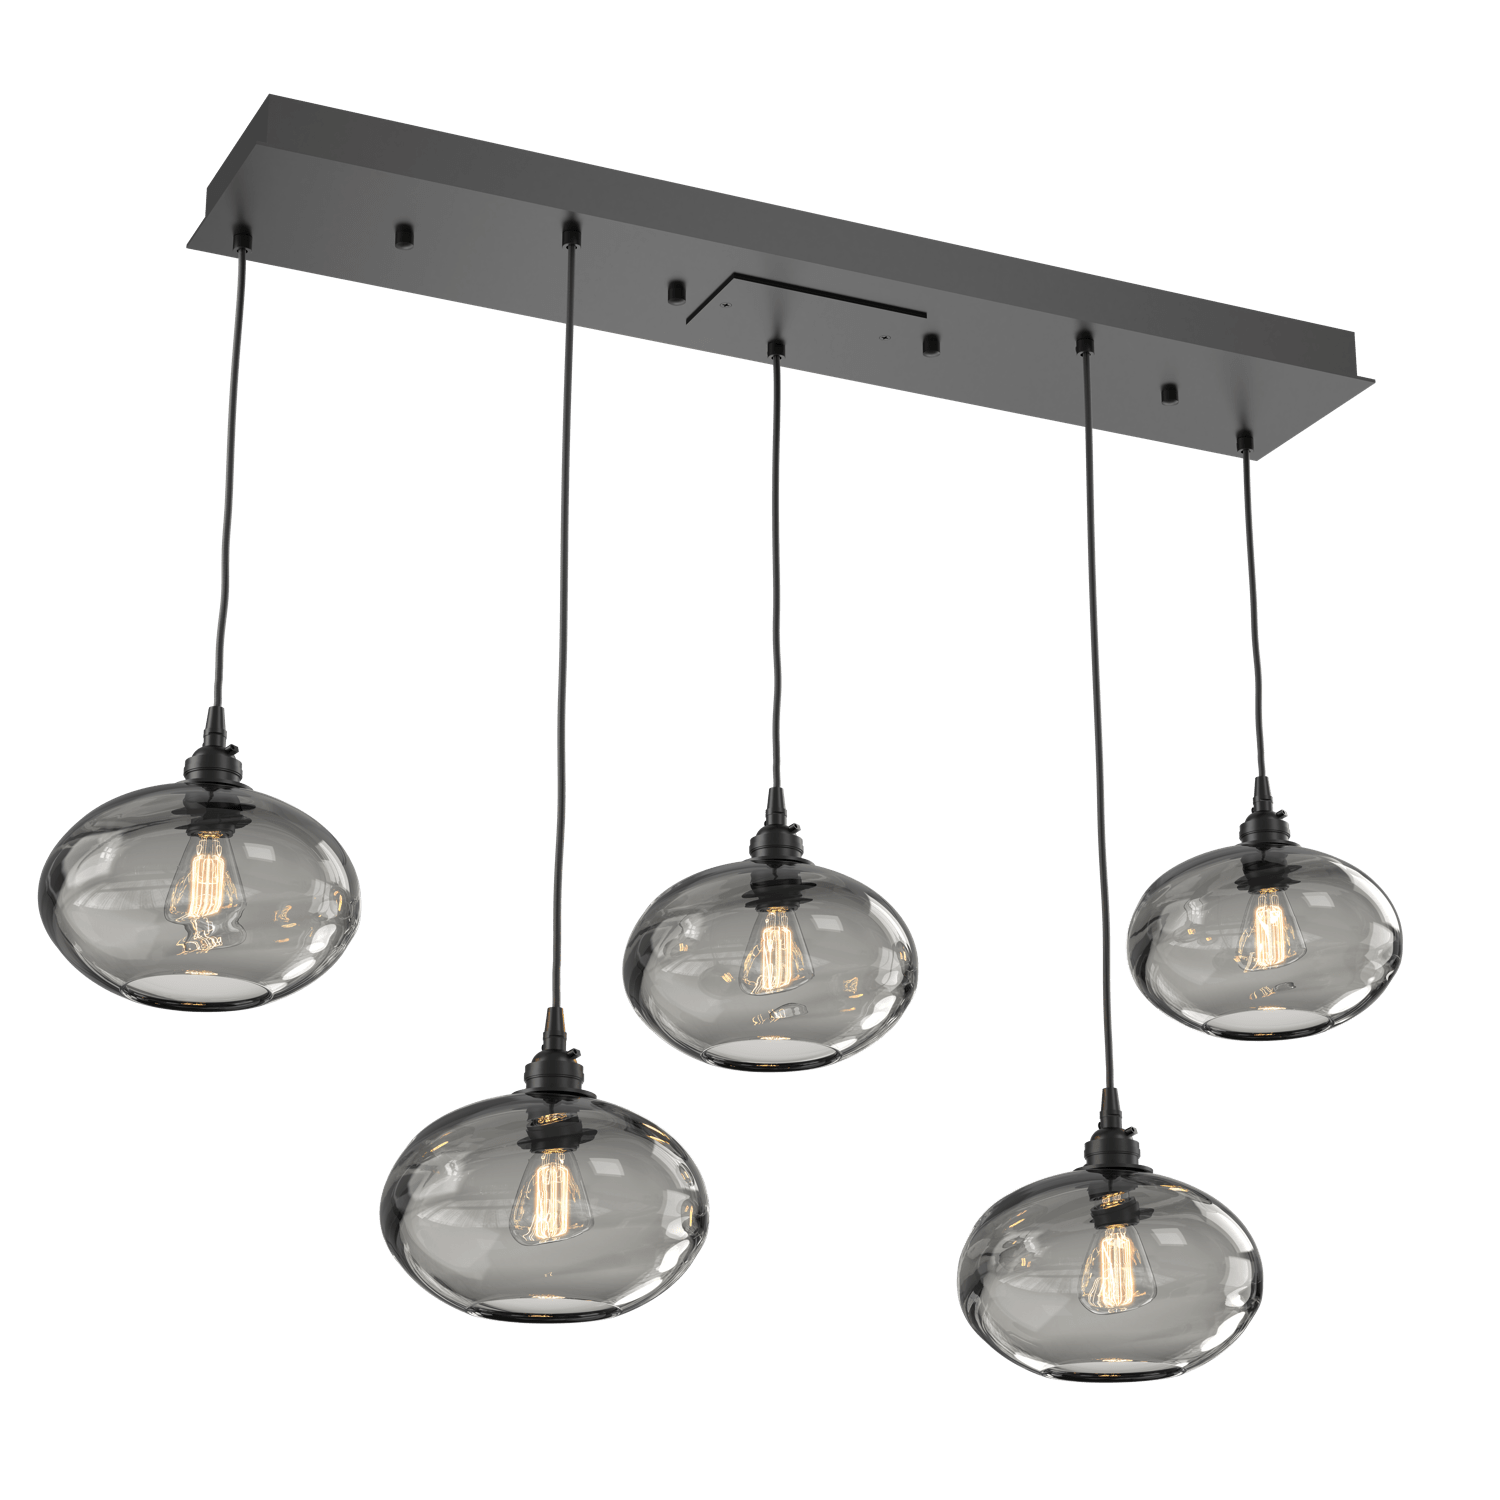 PLB0036-05-MB-OS-Hammerton-Studio-Optic-Blown-Glass-Coppa-5-light-linear-pendant-chandelier-with-matte-black-finish-and-optic-smoke-blown-glass-shades-and-incandescent-lamping